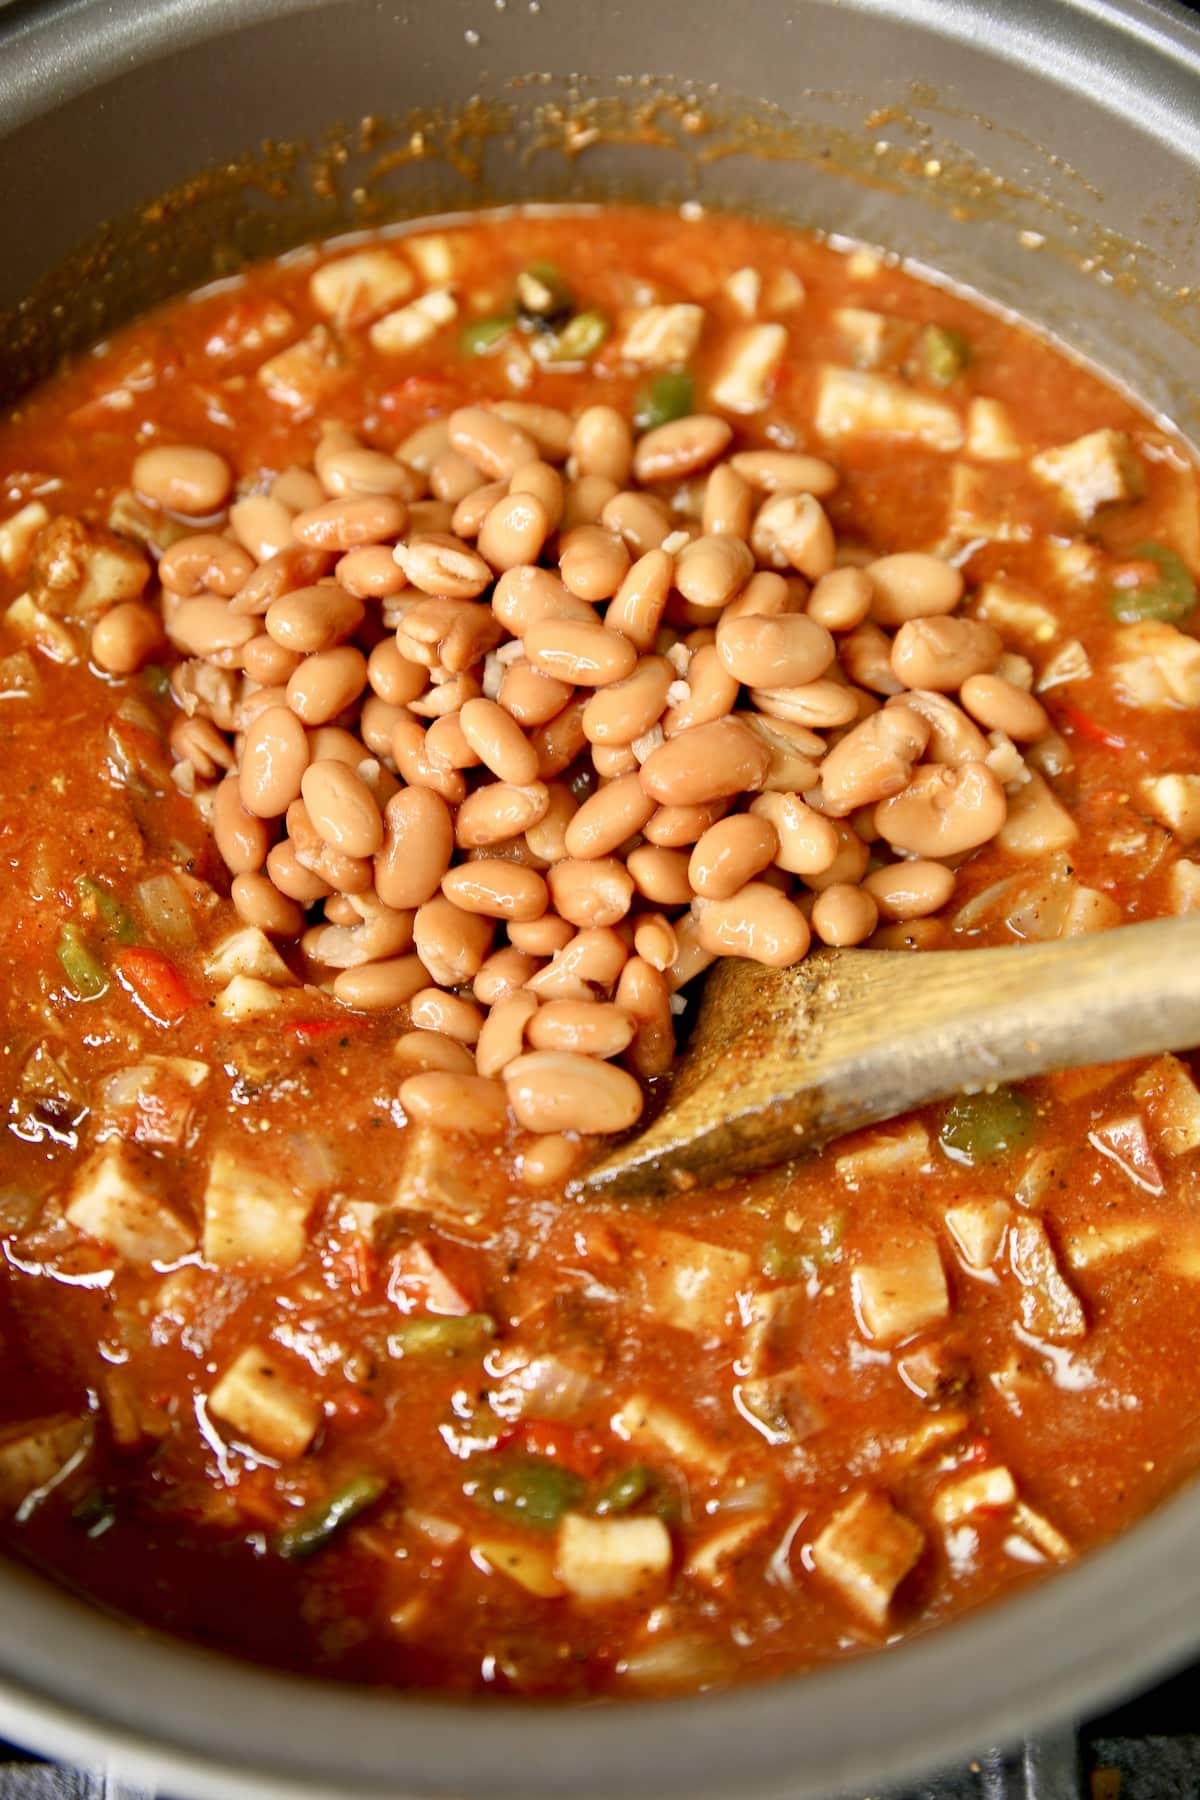 Adding pinto beans to pan of chili, wooden spoon.